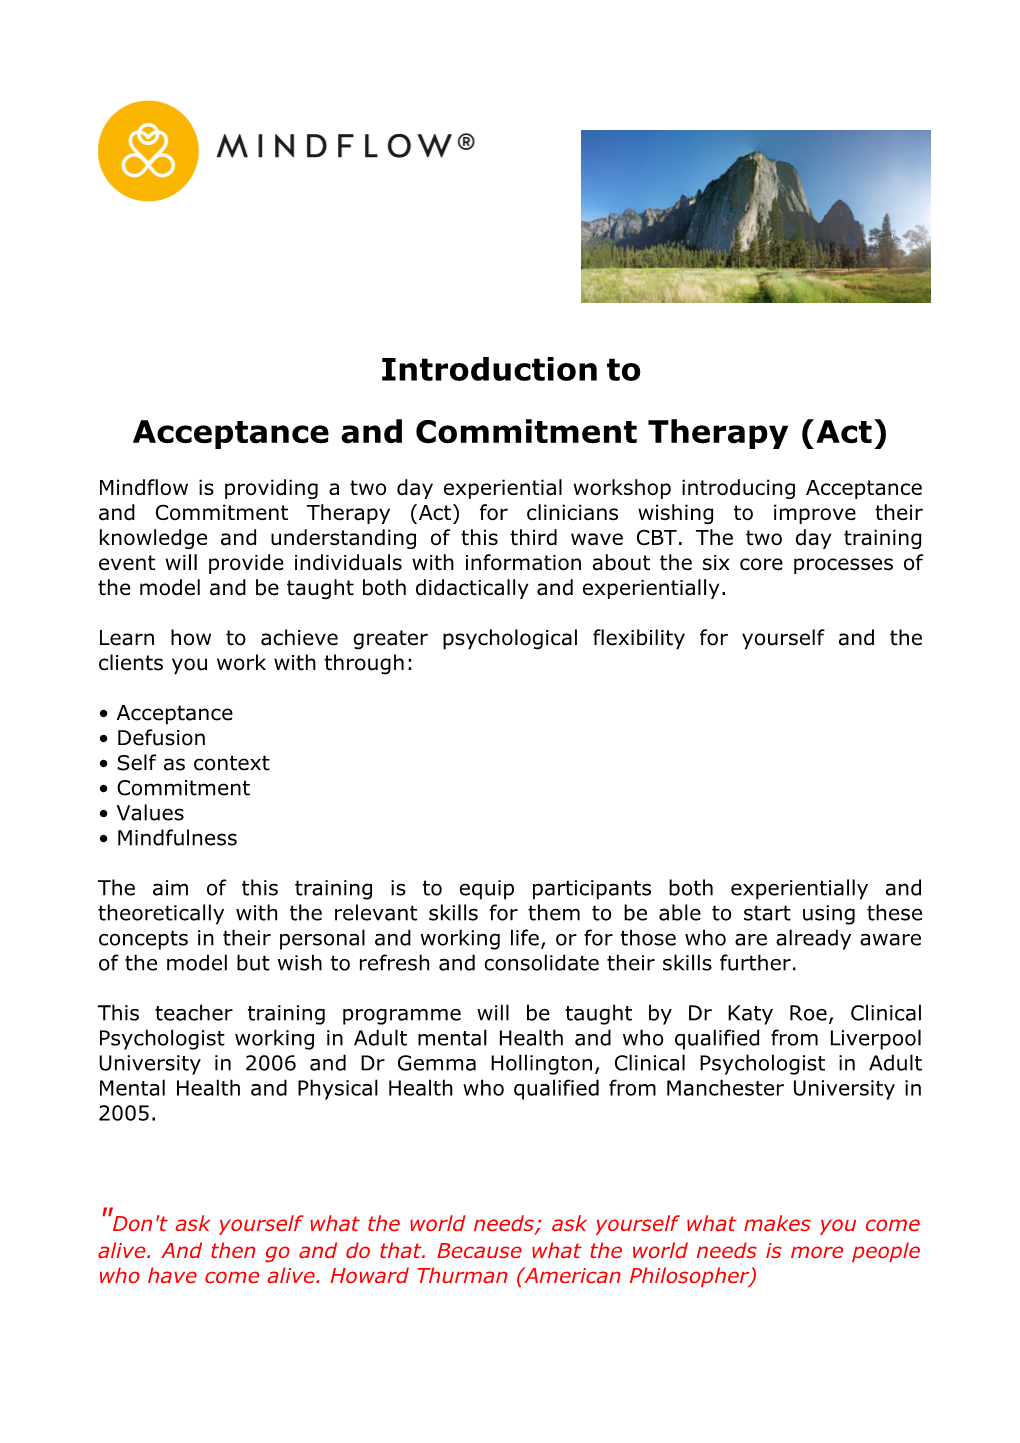 Acceptance and Commitment Therapy (Act)